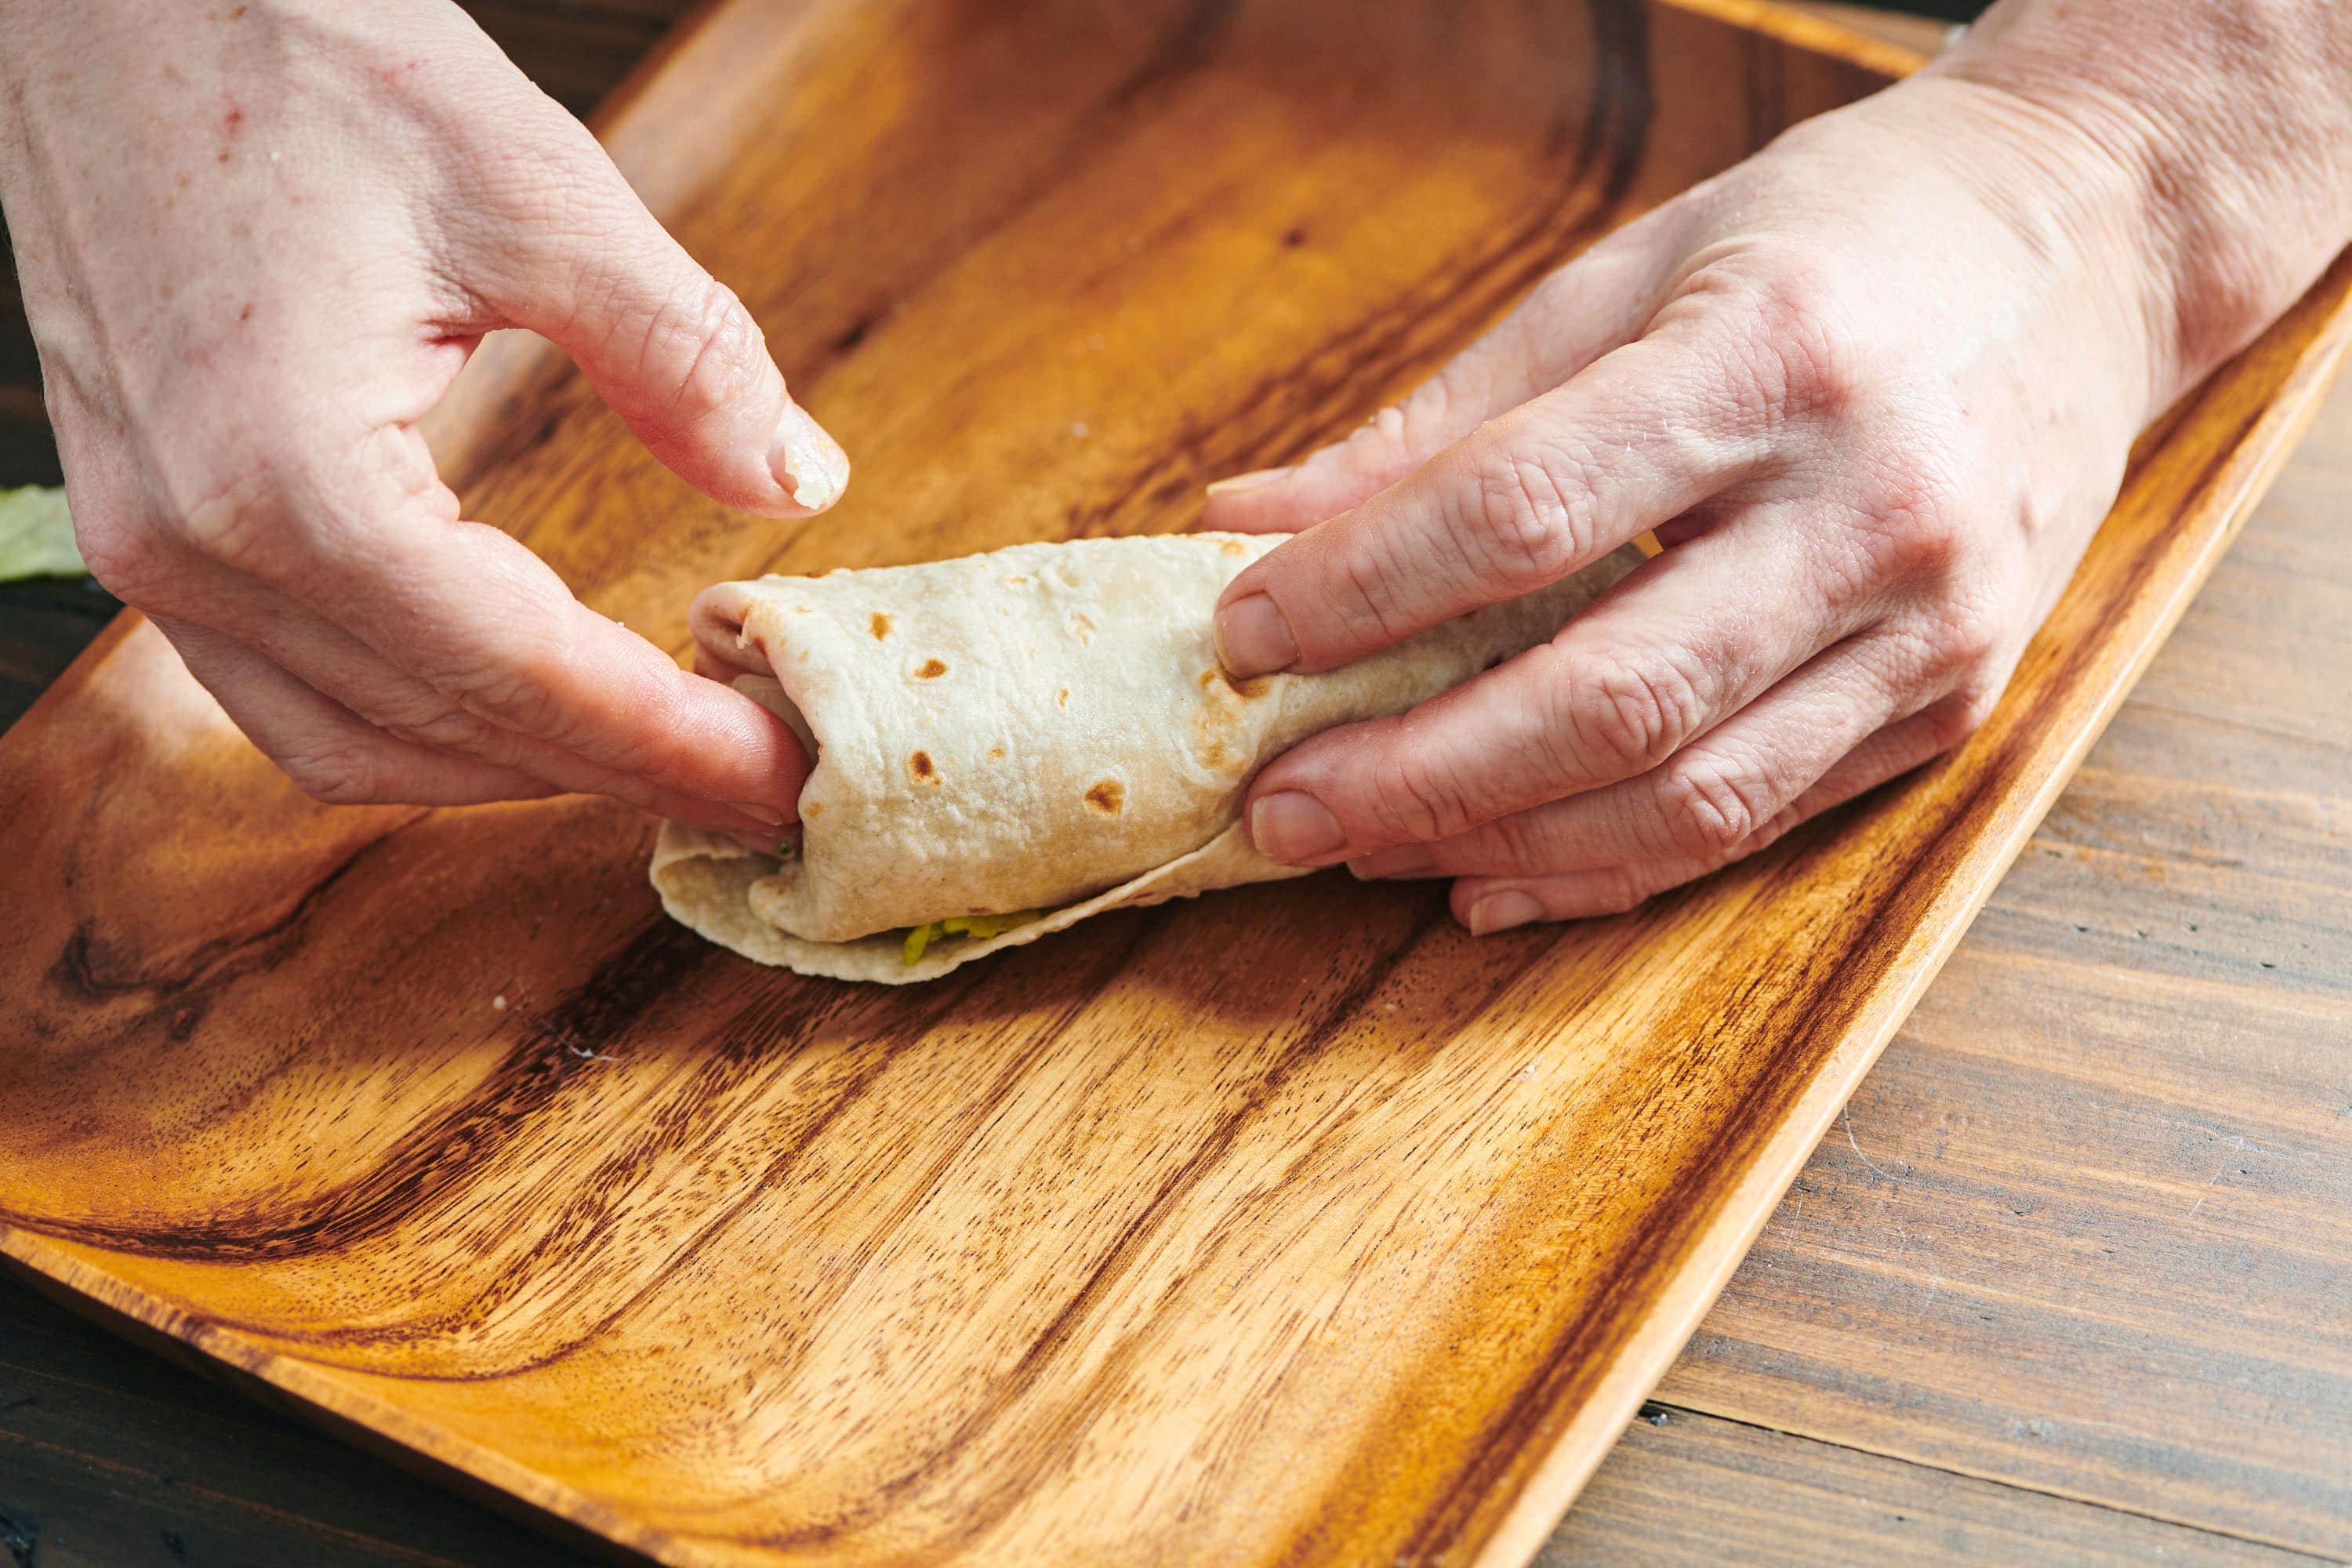 Woman tucking part of a tortilla into the end of a wrap.